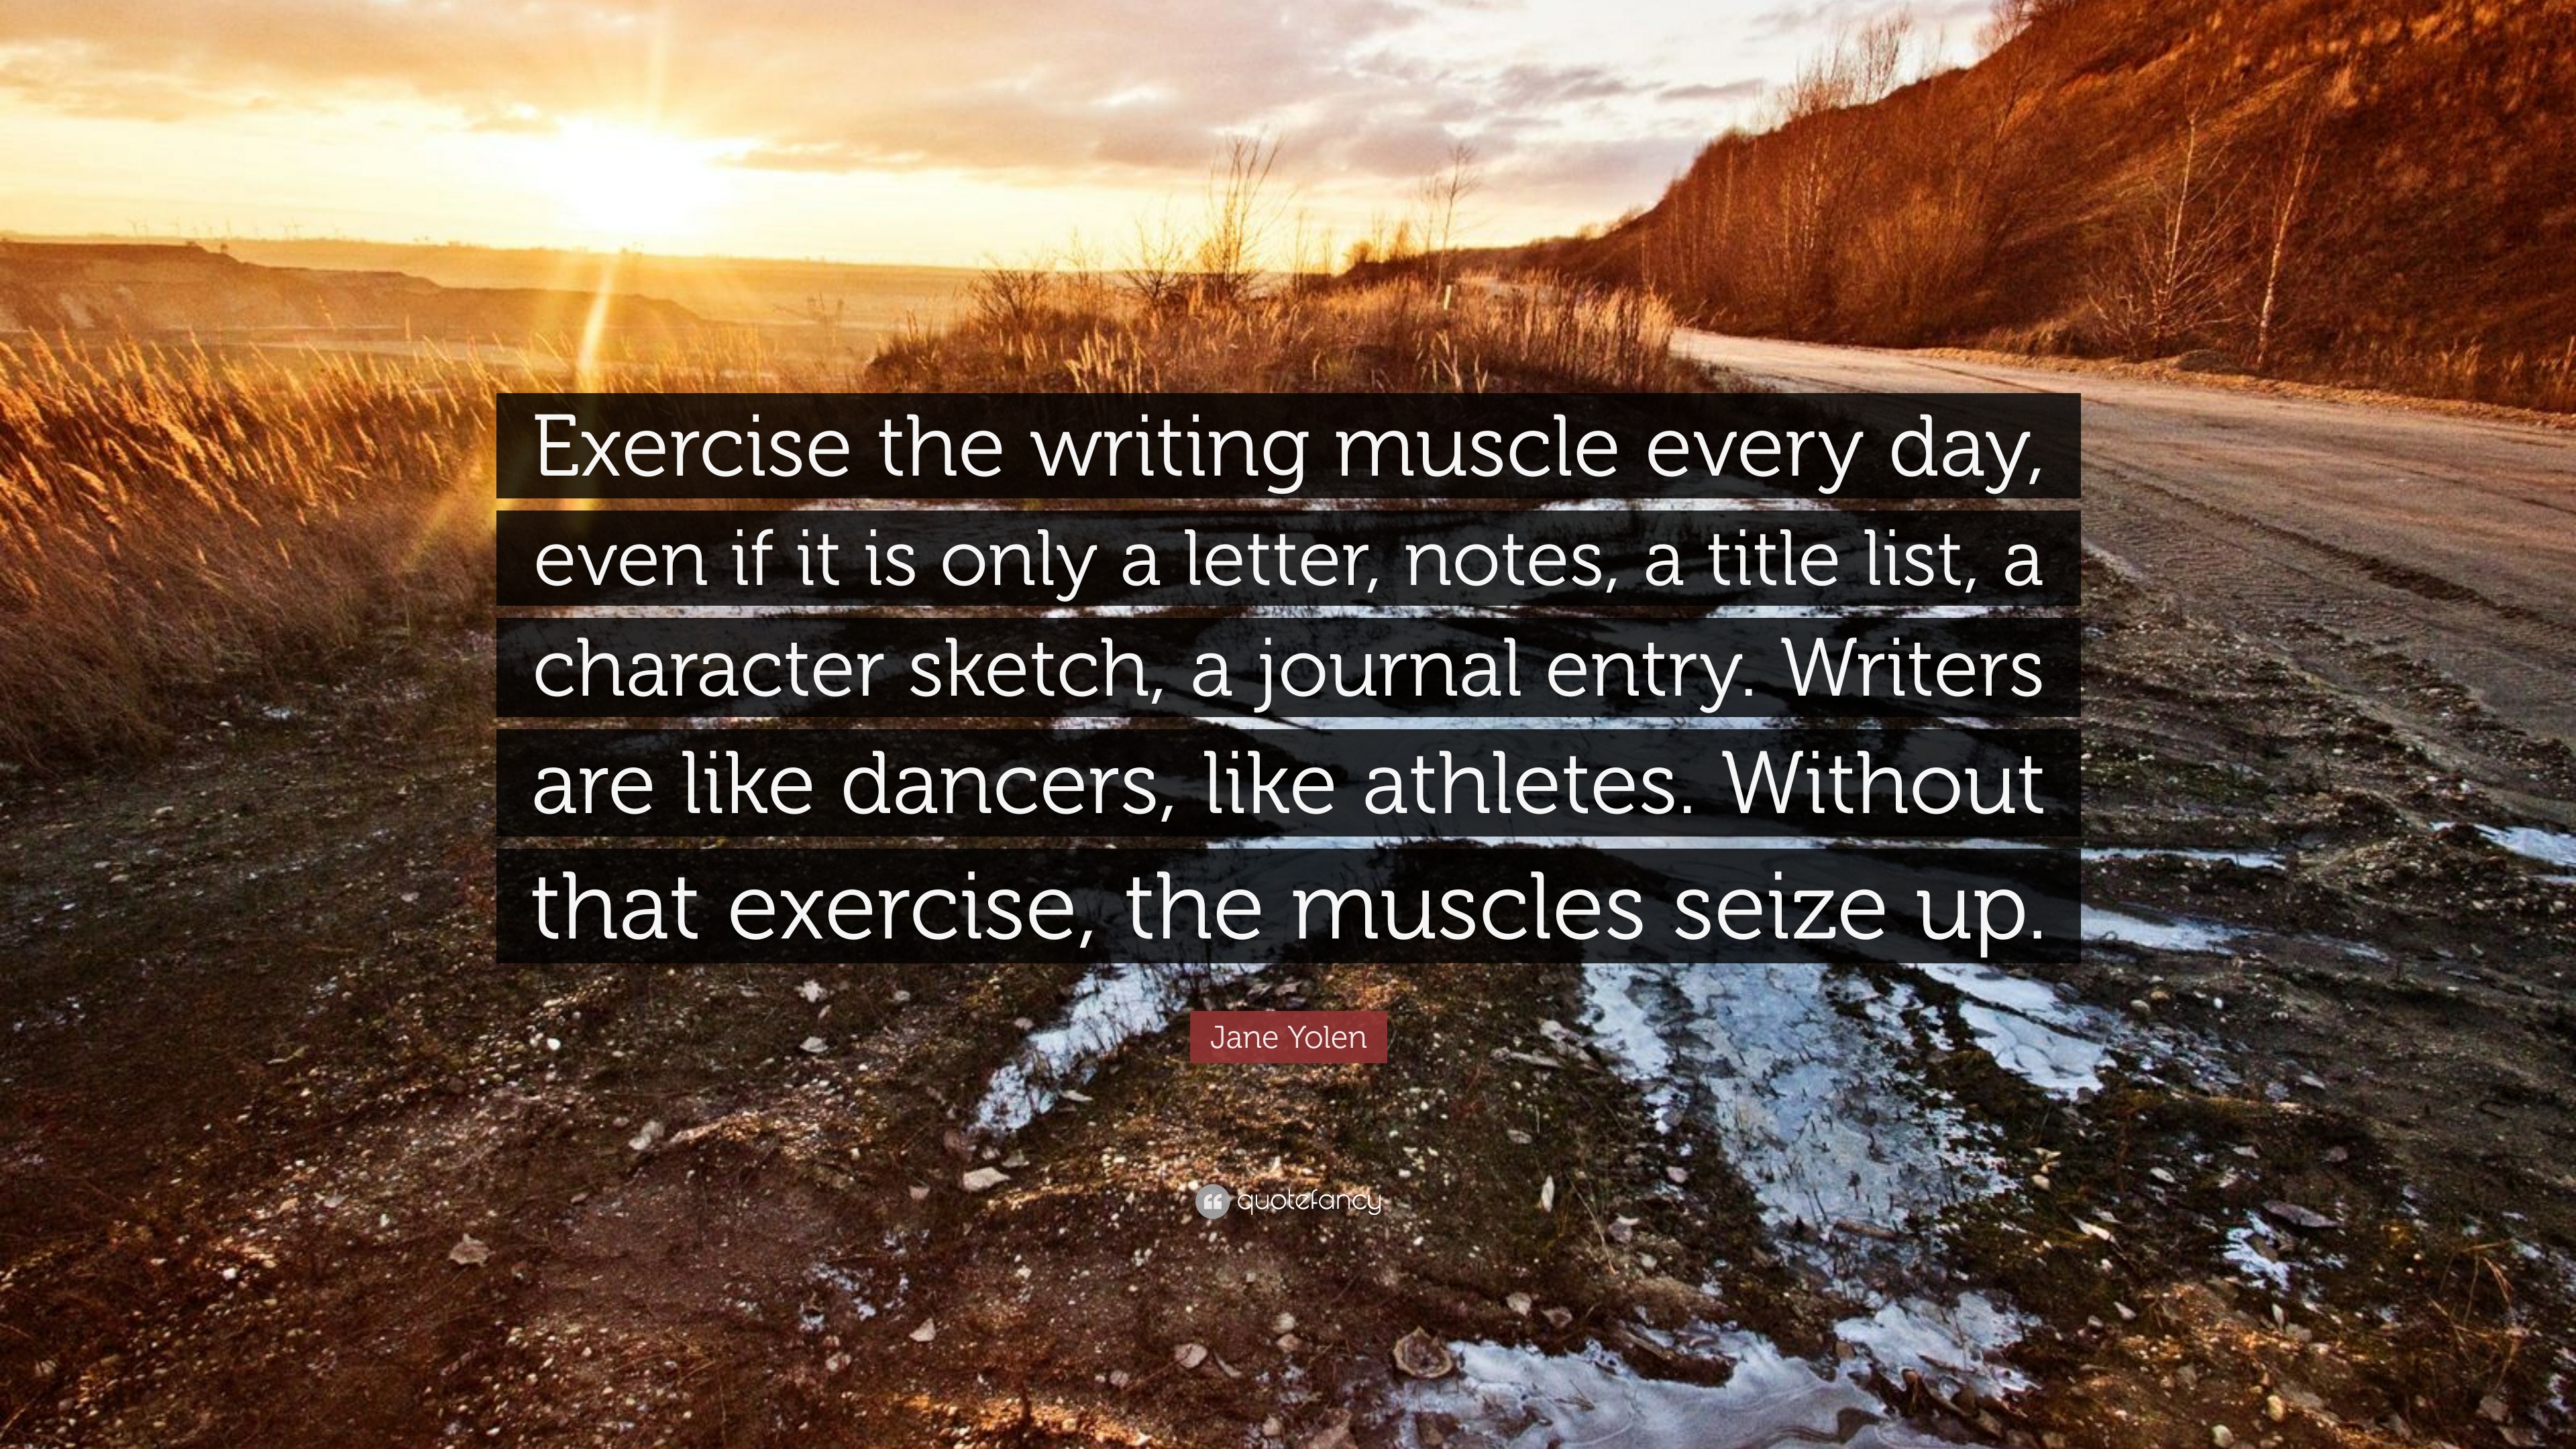 Jane Yolen Quote Exercise the writing muscle every day even if it is  only a letter notes a title list a character sketch a journal e